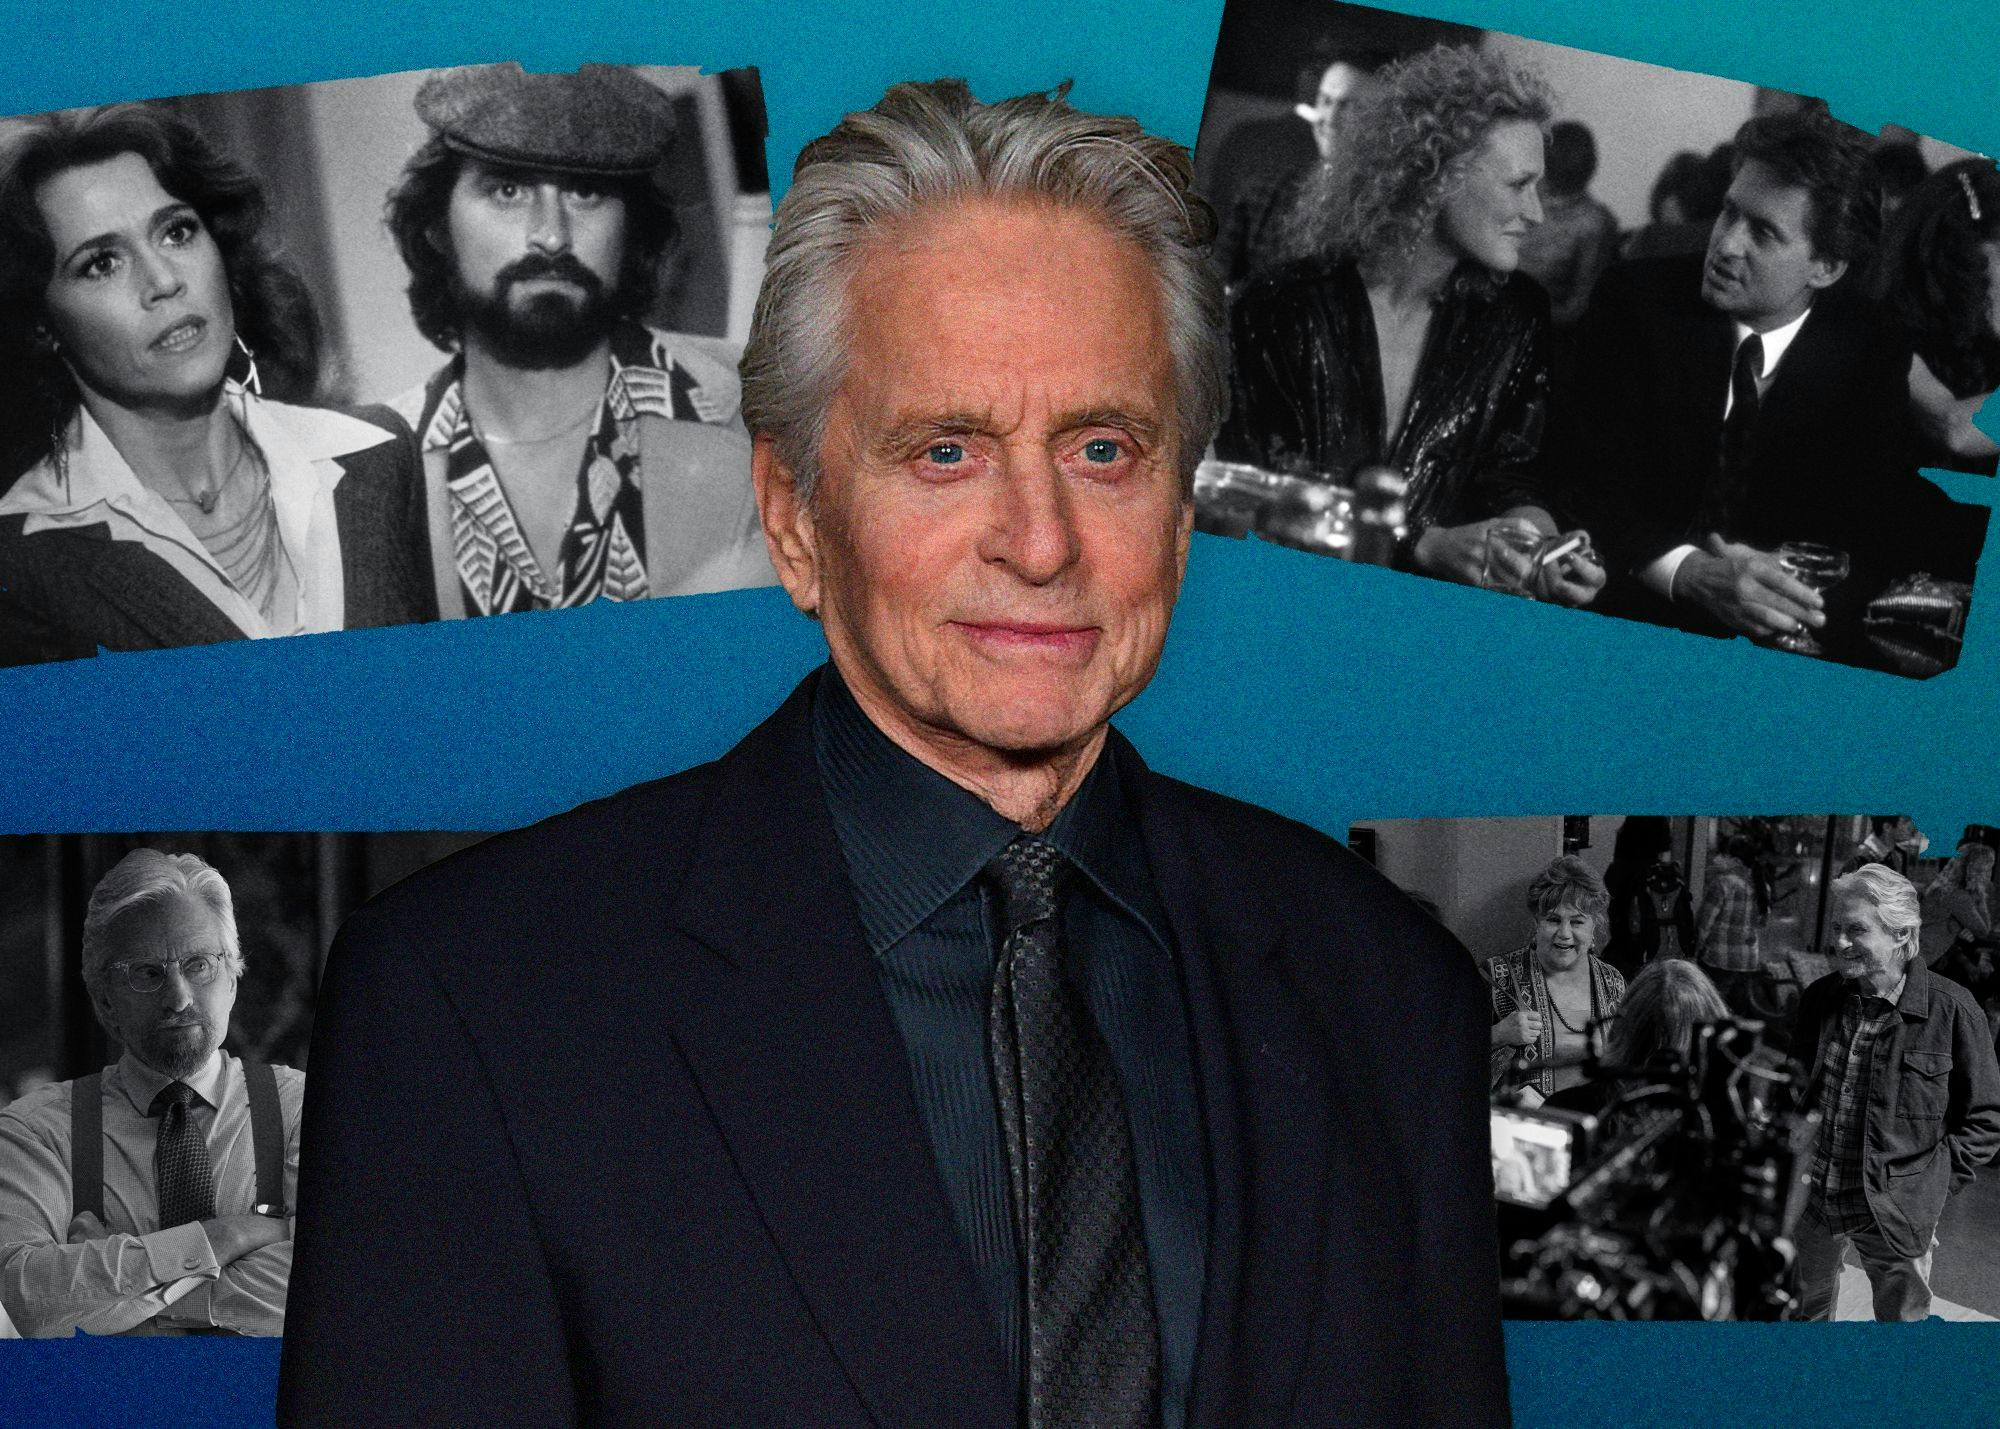 Michael Douglas wears a black blazer, tie, and shirt, and smiles slightly. The background is teal with images from his past movies. 